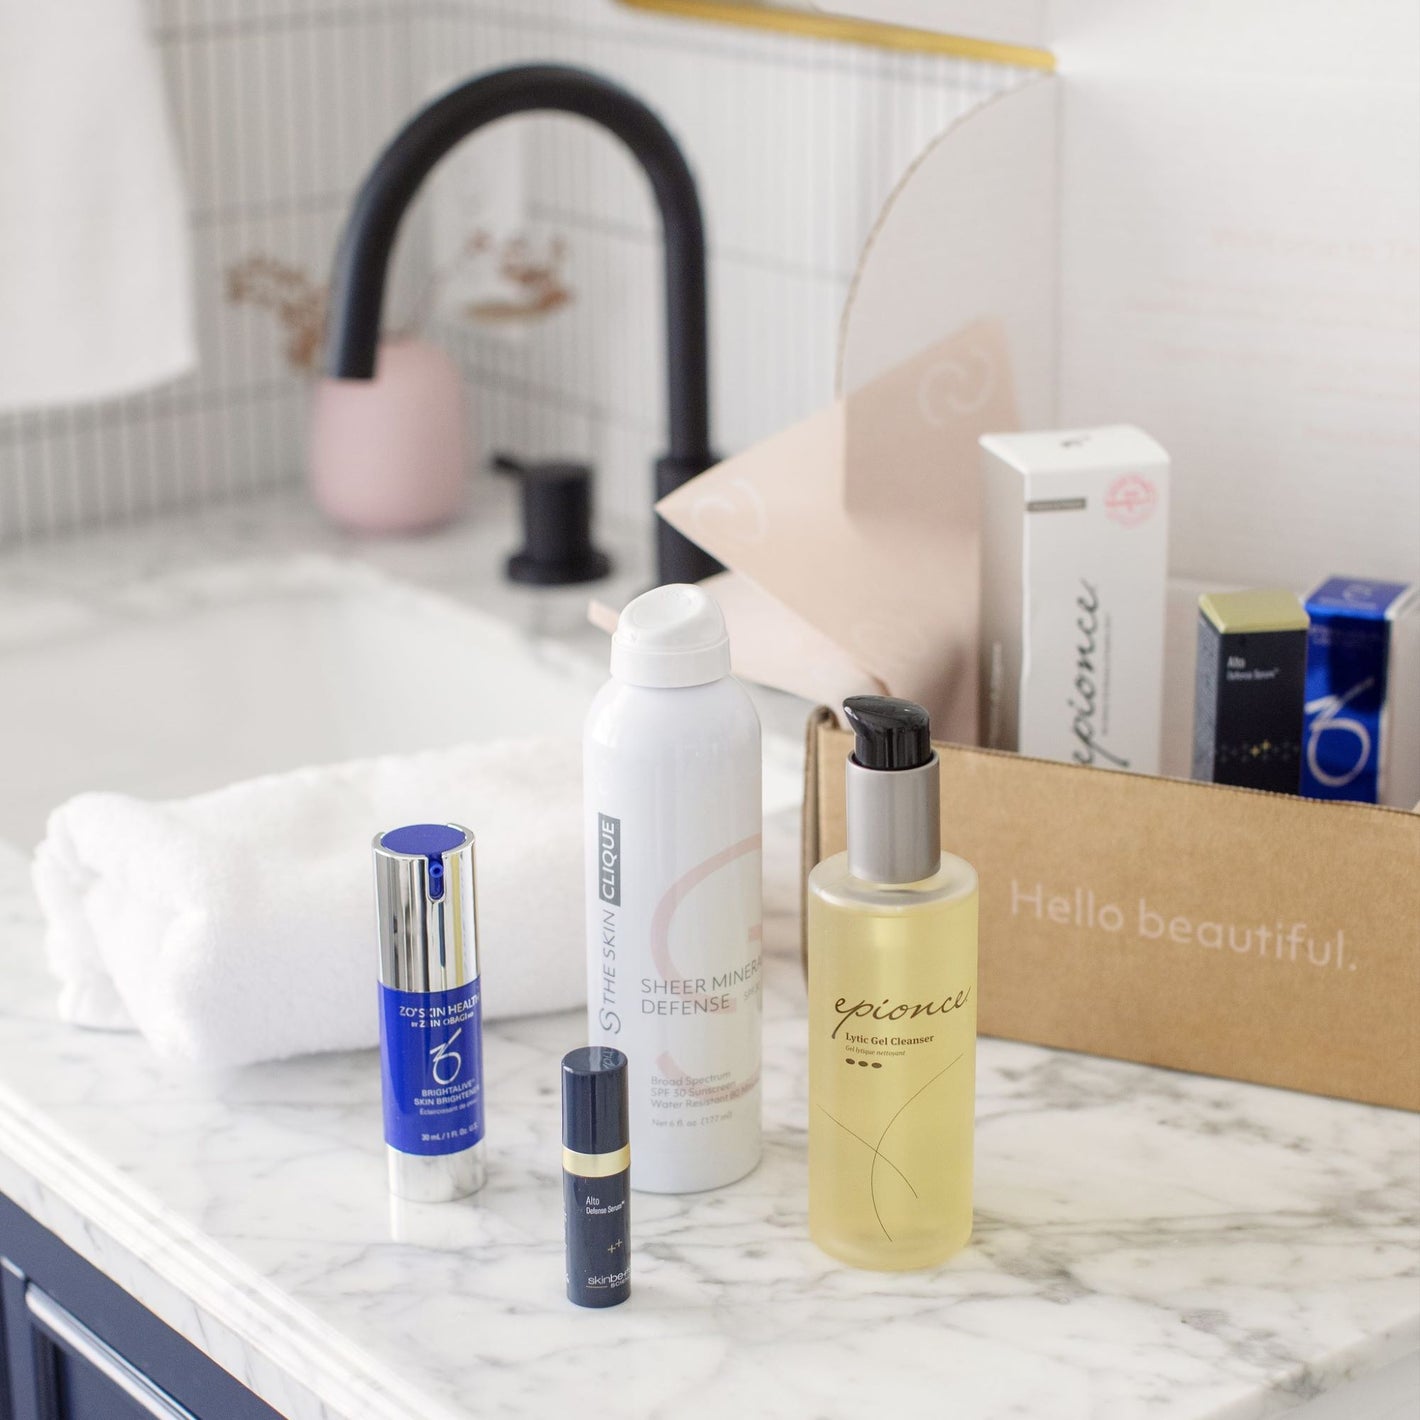 High-quality skincare from ZO Skin Health, The Skin Clique, Skinbetter, and Epionce